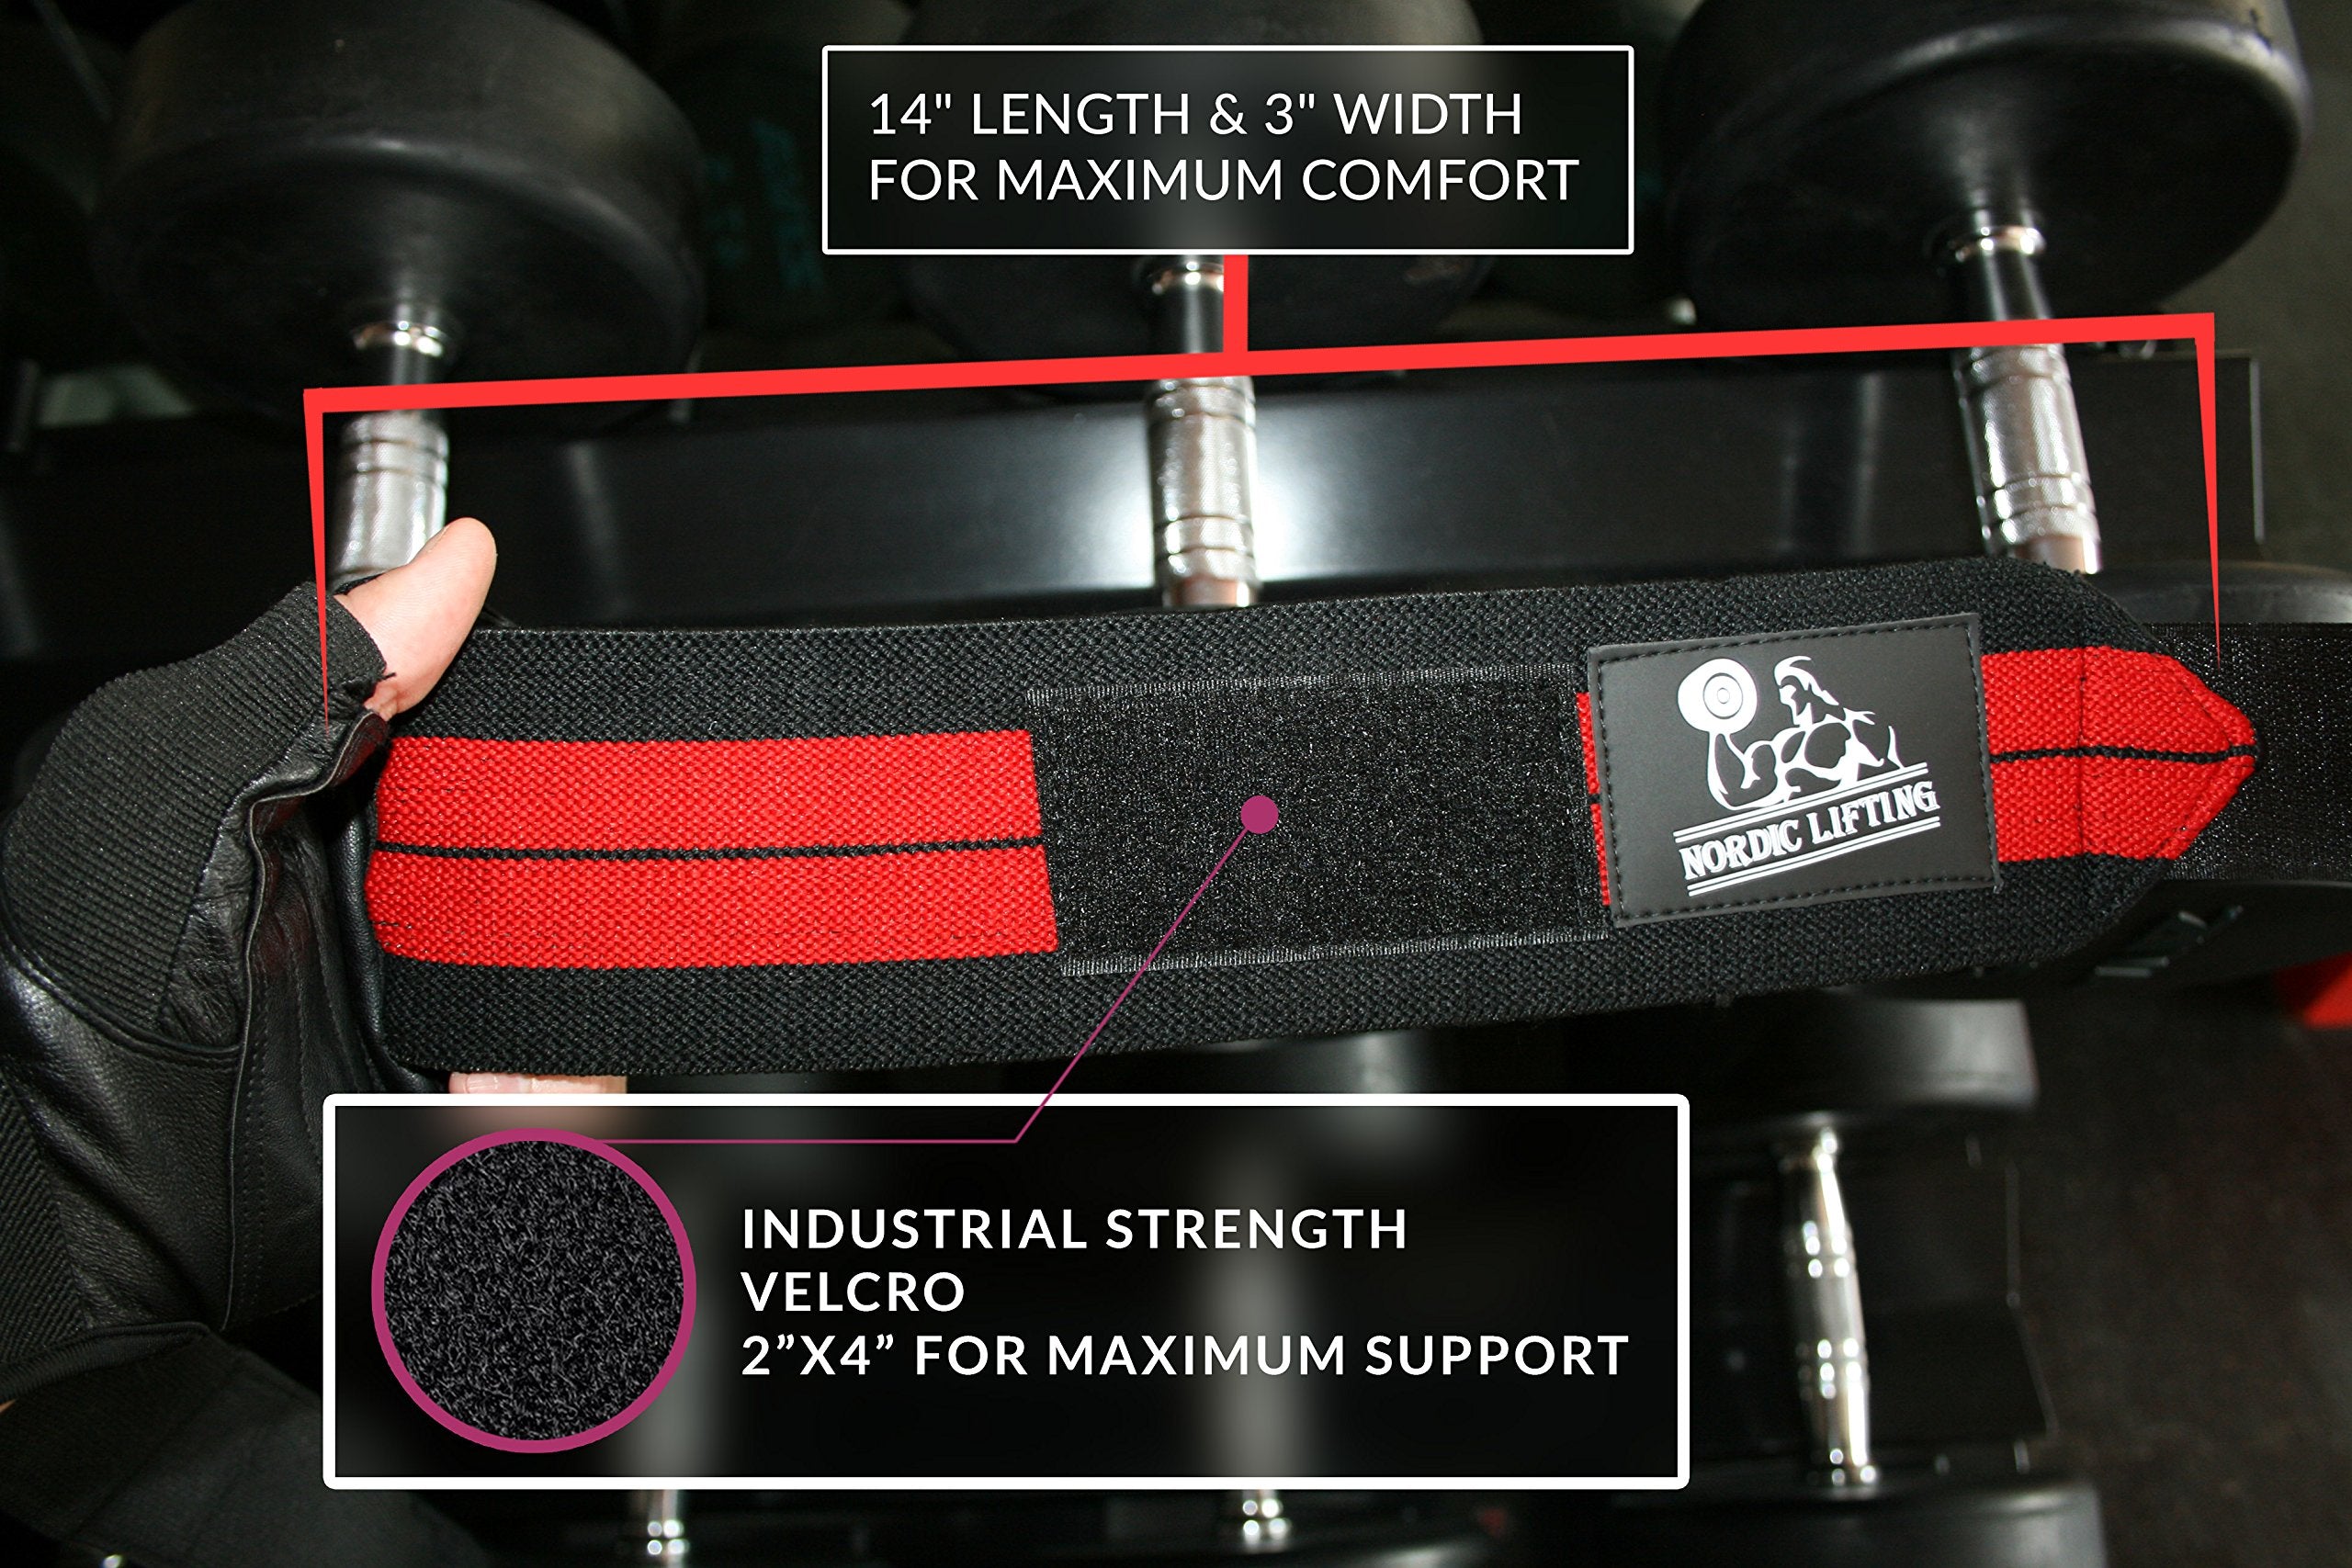 Nordic Lifting Wrist Wraps (1 Pair/2 Wraps) 14" for Weightlifting | Cross Training | Powerlifting - for Women & Men - Hand Strength & Support During Weight Lifting (Red) - 1 Year Warranty